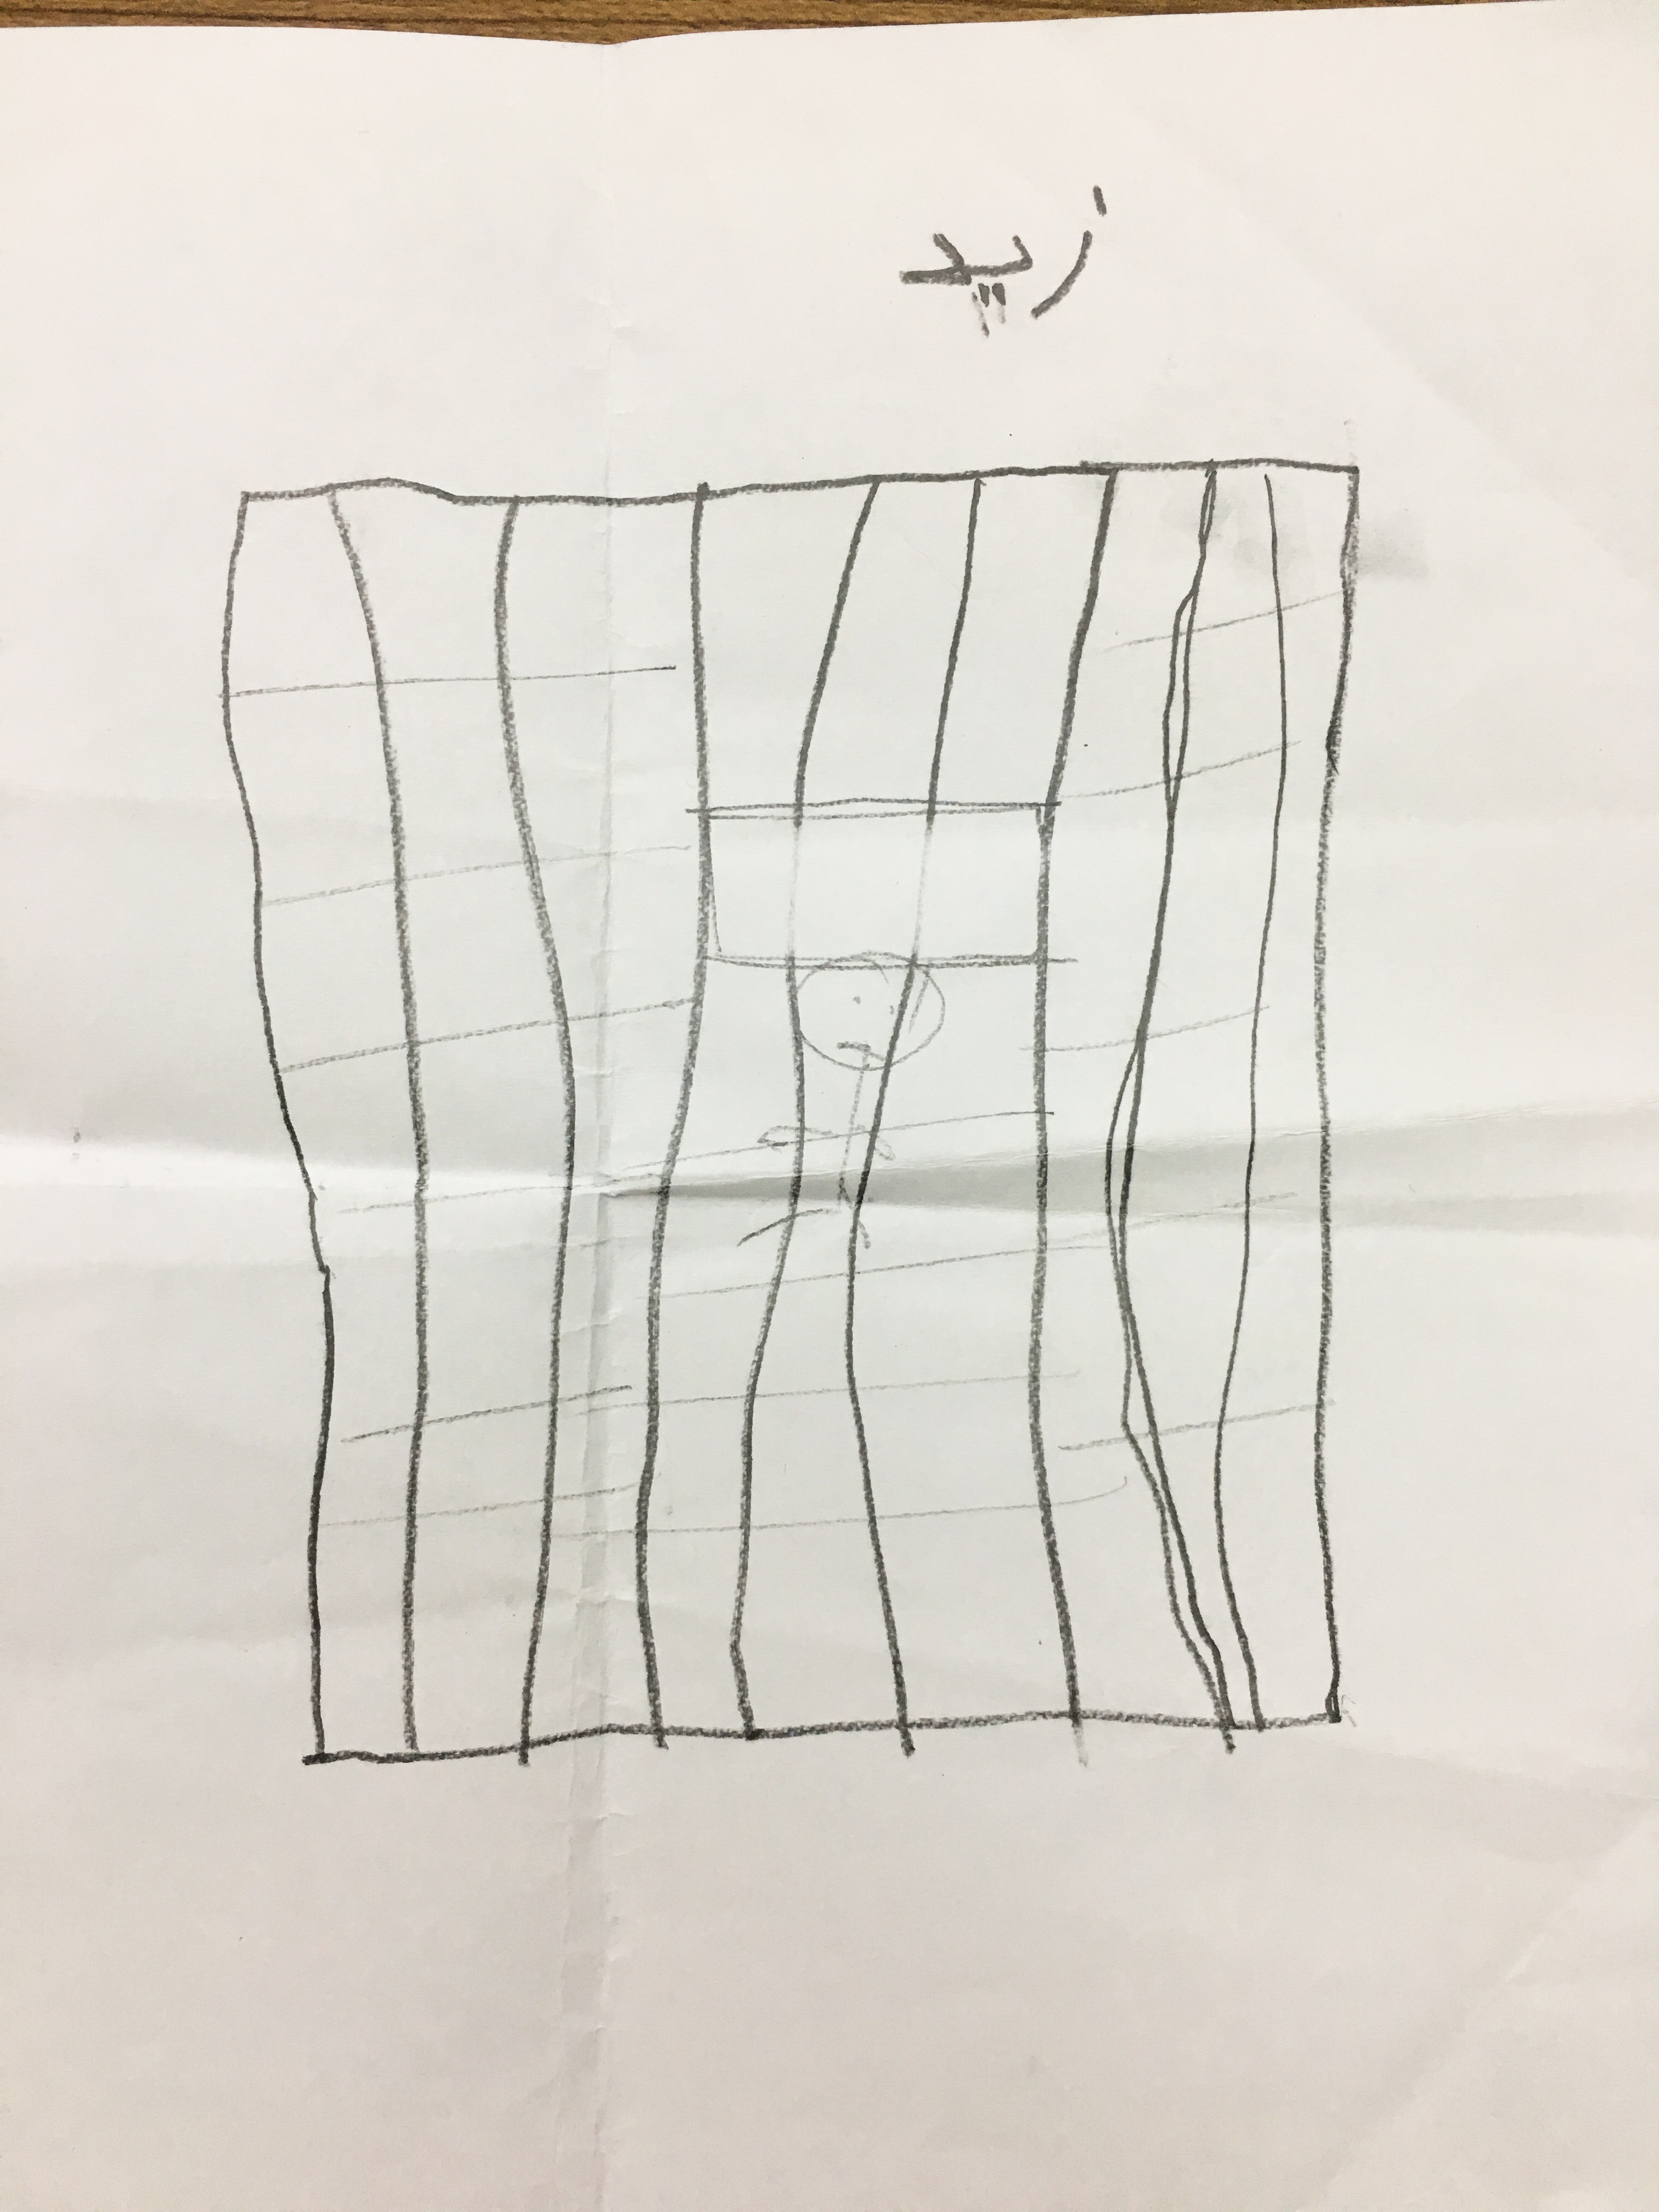 A child's drawing from a PSS session in Iraq